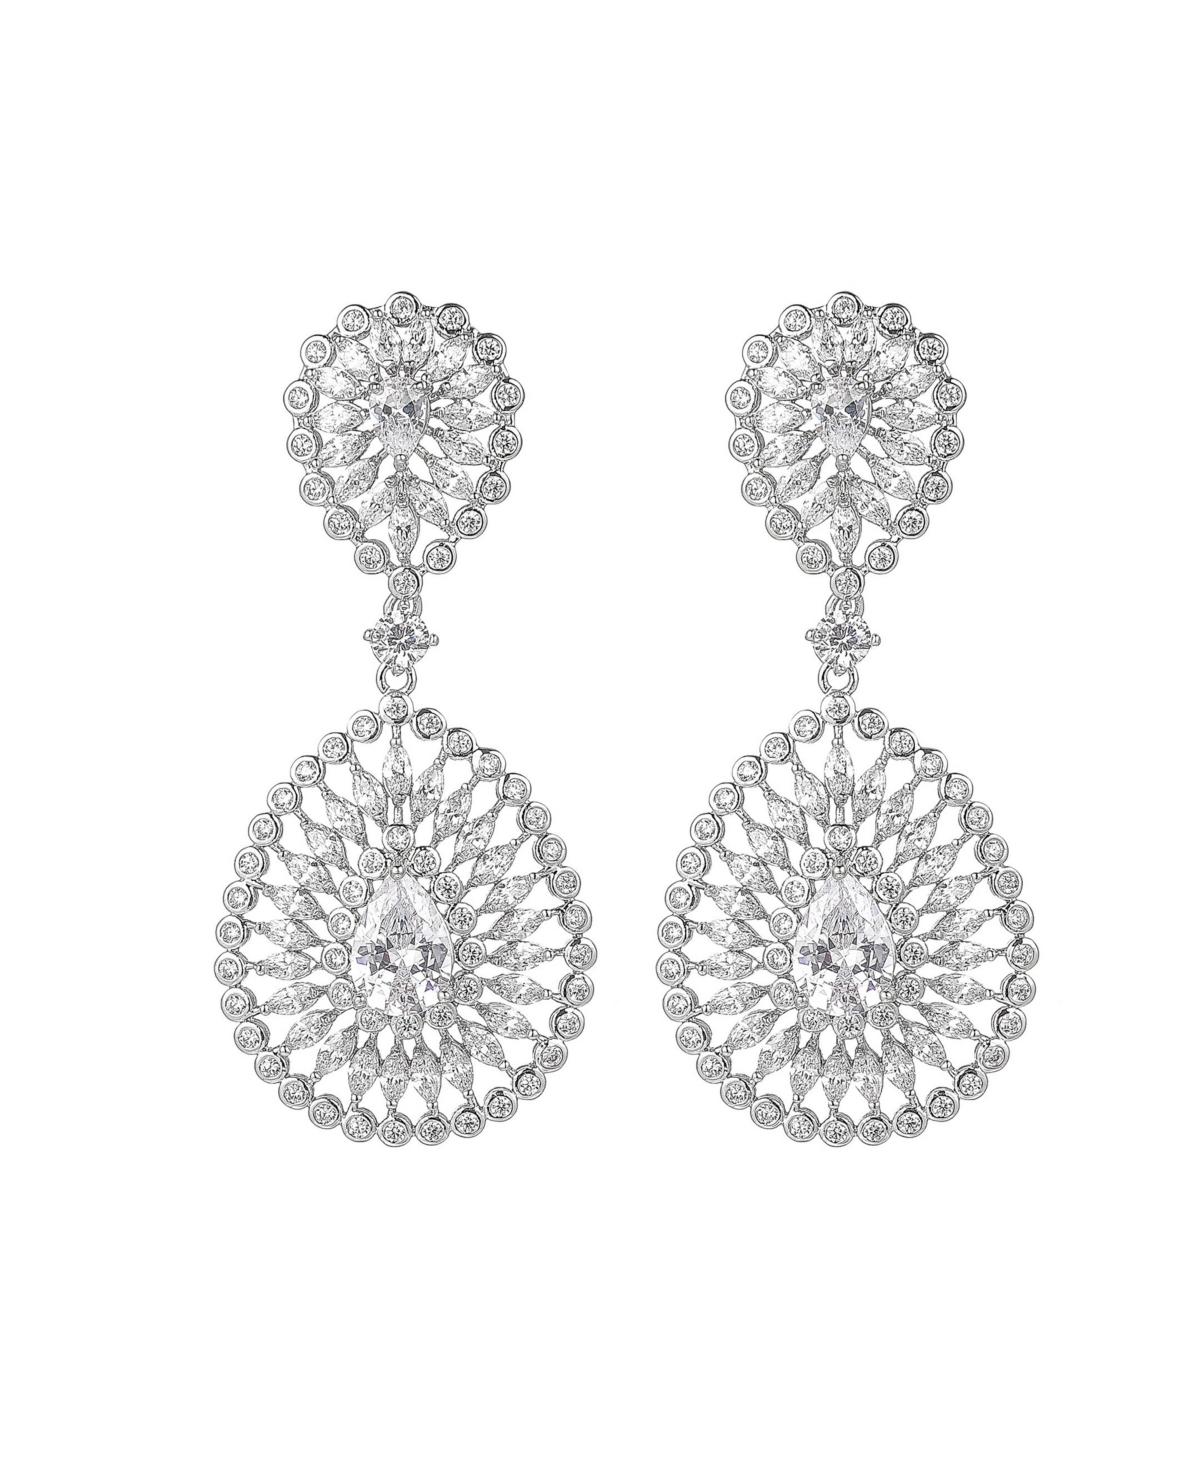 Silver-Tone Accent Big Disc Earrings - Silver-Tone